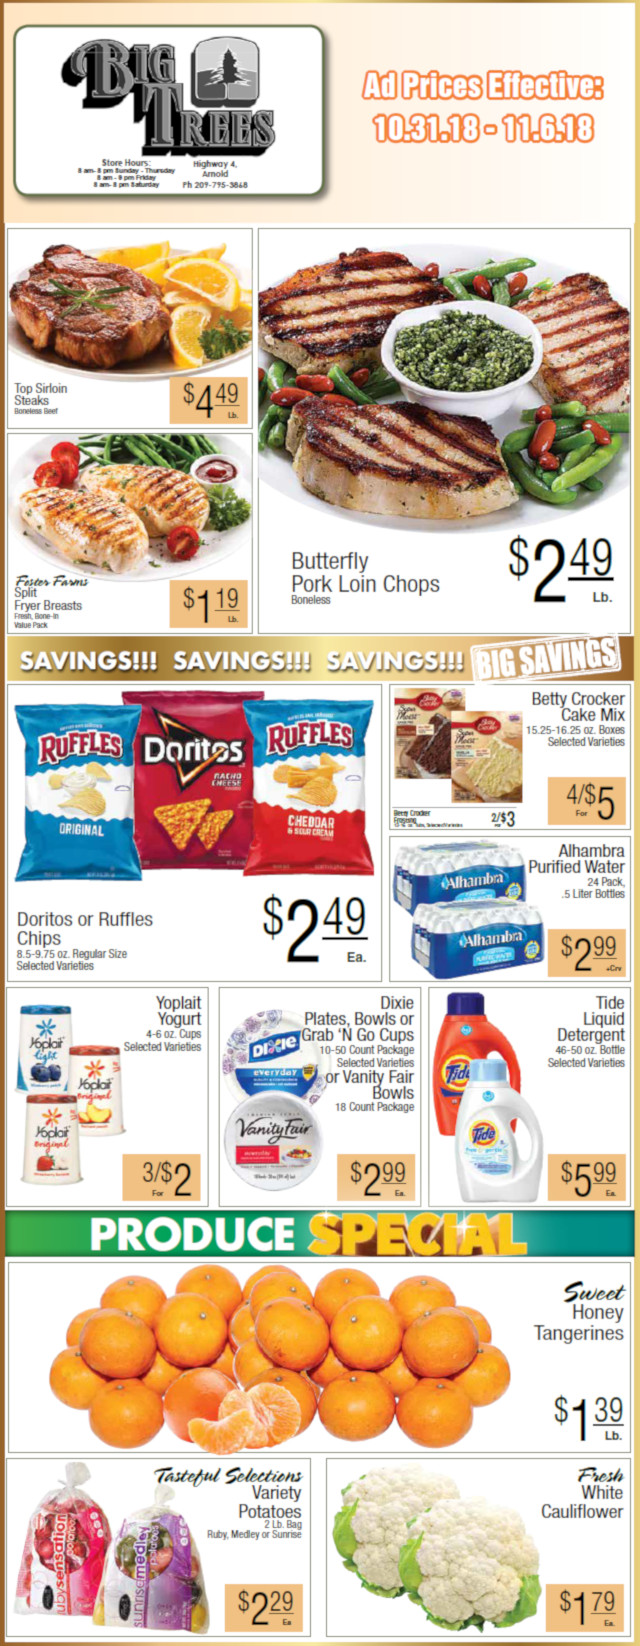 Big Trees Market Weekly Ad & Grocery Specials Through November 6th